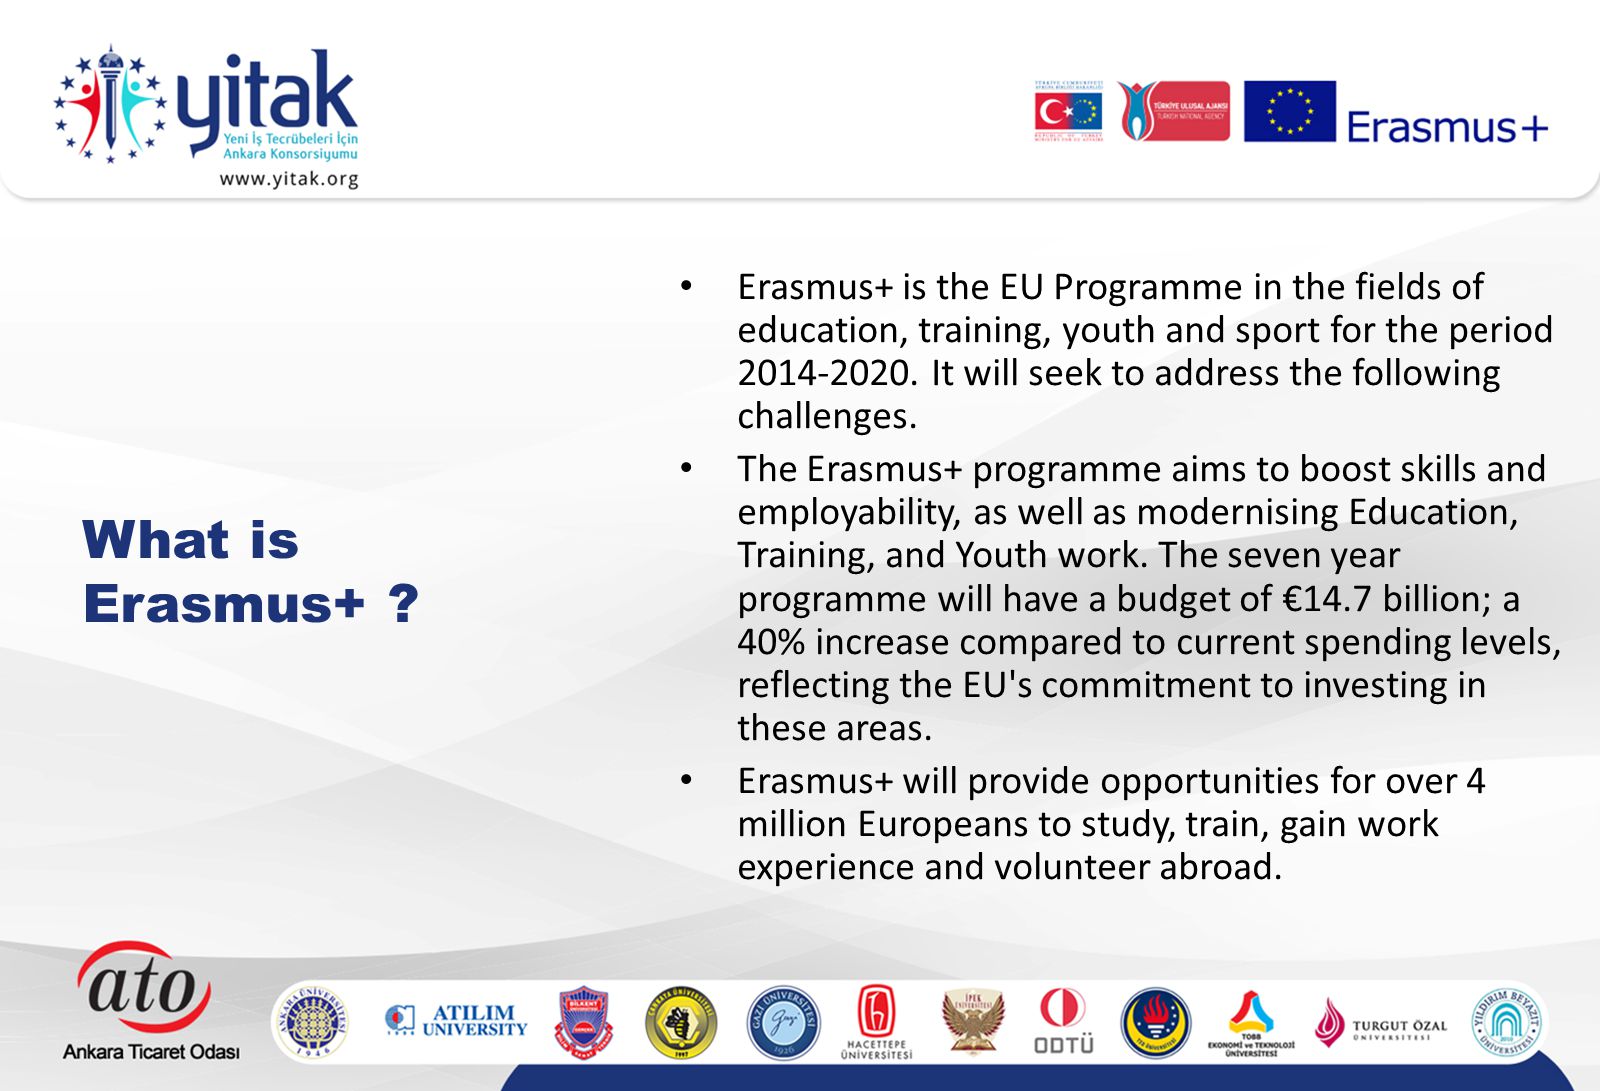 Erasmus+ is the EU Programme in the fields of education, training, youth and sport for the period